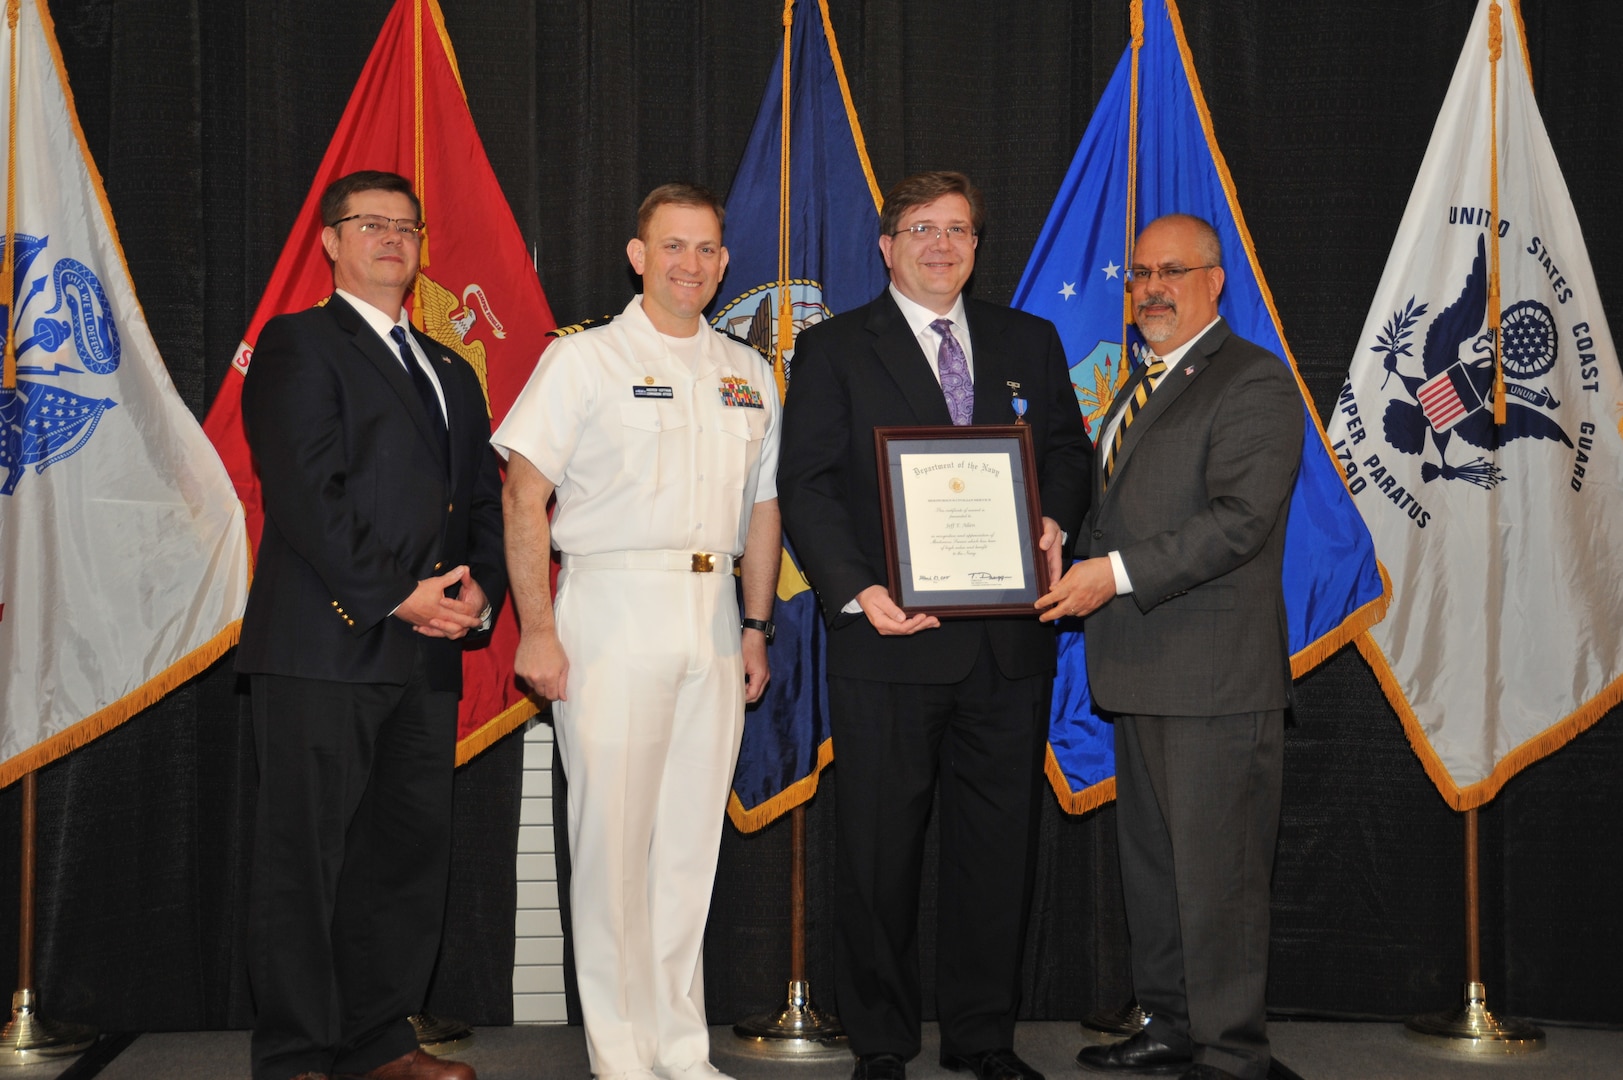 IMAGE: Jeff Allen is presented the Navy Meritorious Civilian Service Award at Naval Surface Warfare Center Dahlgren Division's annual awards ceremony, Apr. 26 at the Fredericksburg Expo and Conference Center